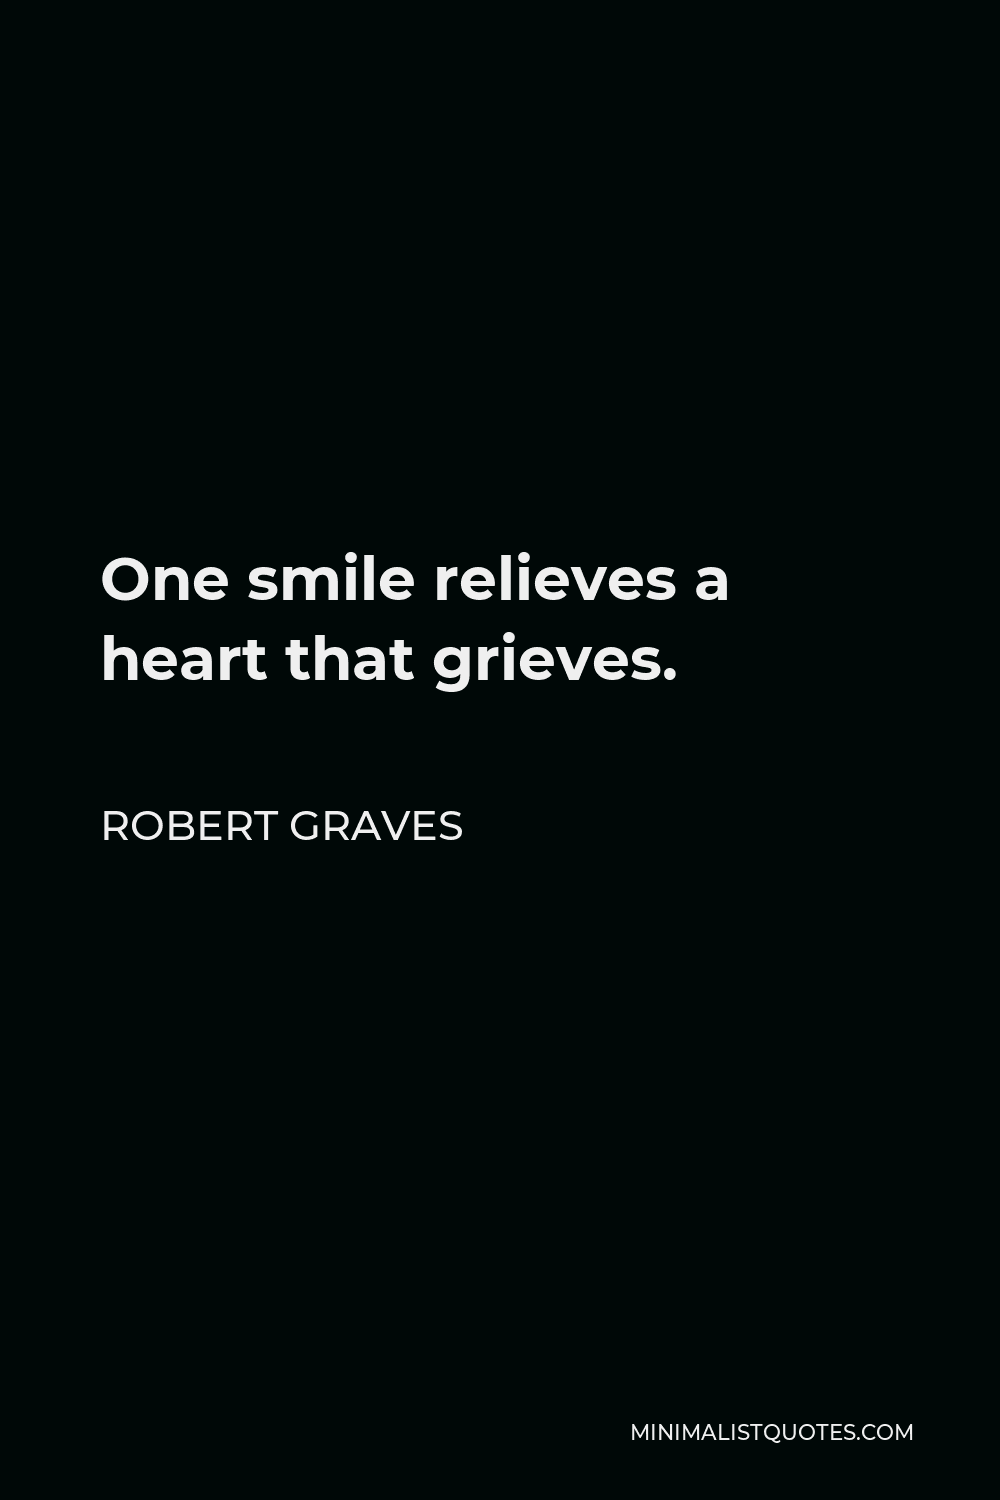 Robert Graves Quote - One smile relieves a heart that grieves.